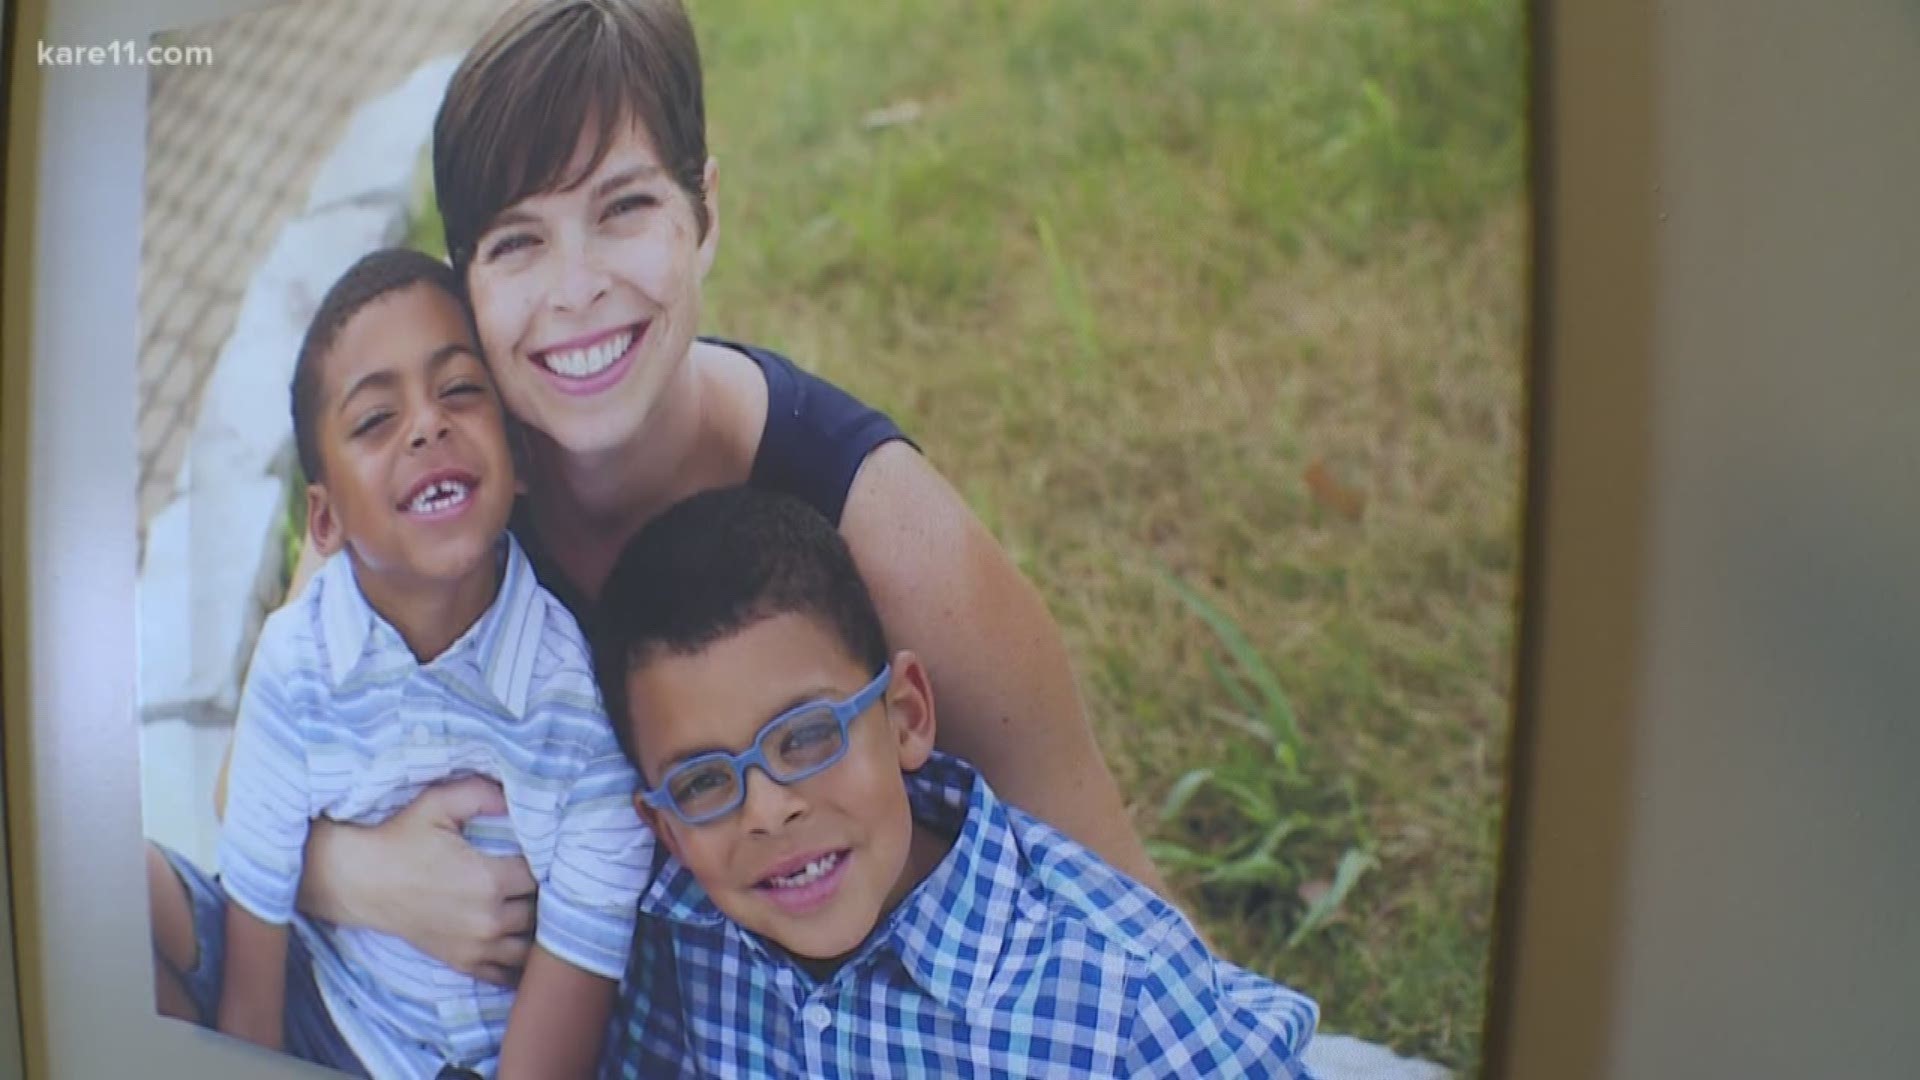 Tessie Sylvester: A widow, a mom, has died. Now, her boys need your help.